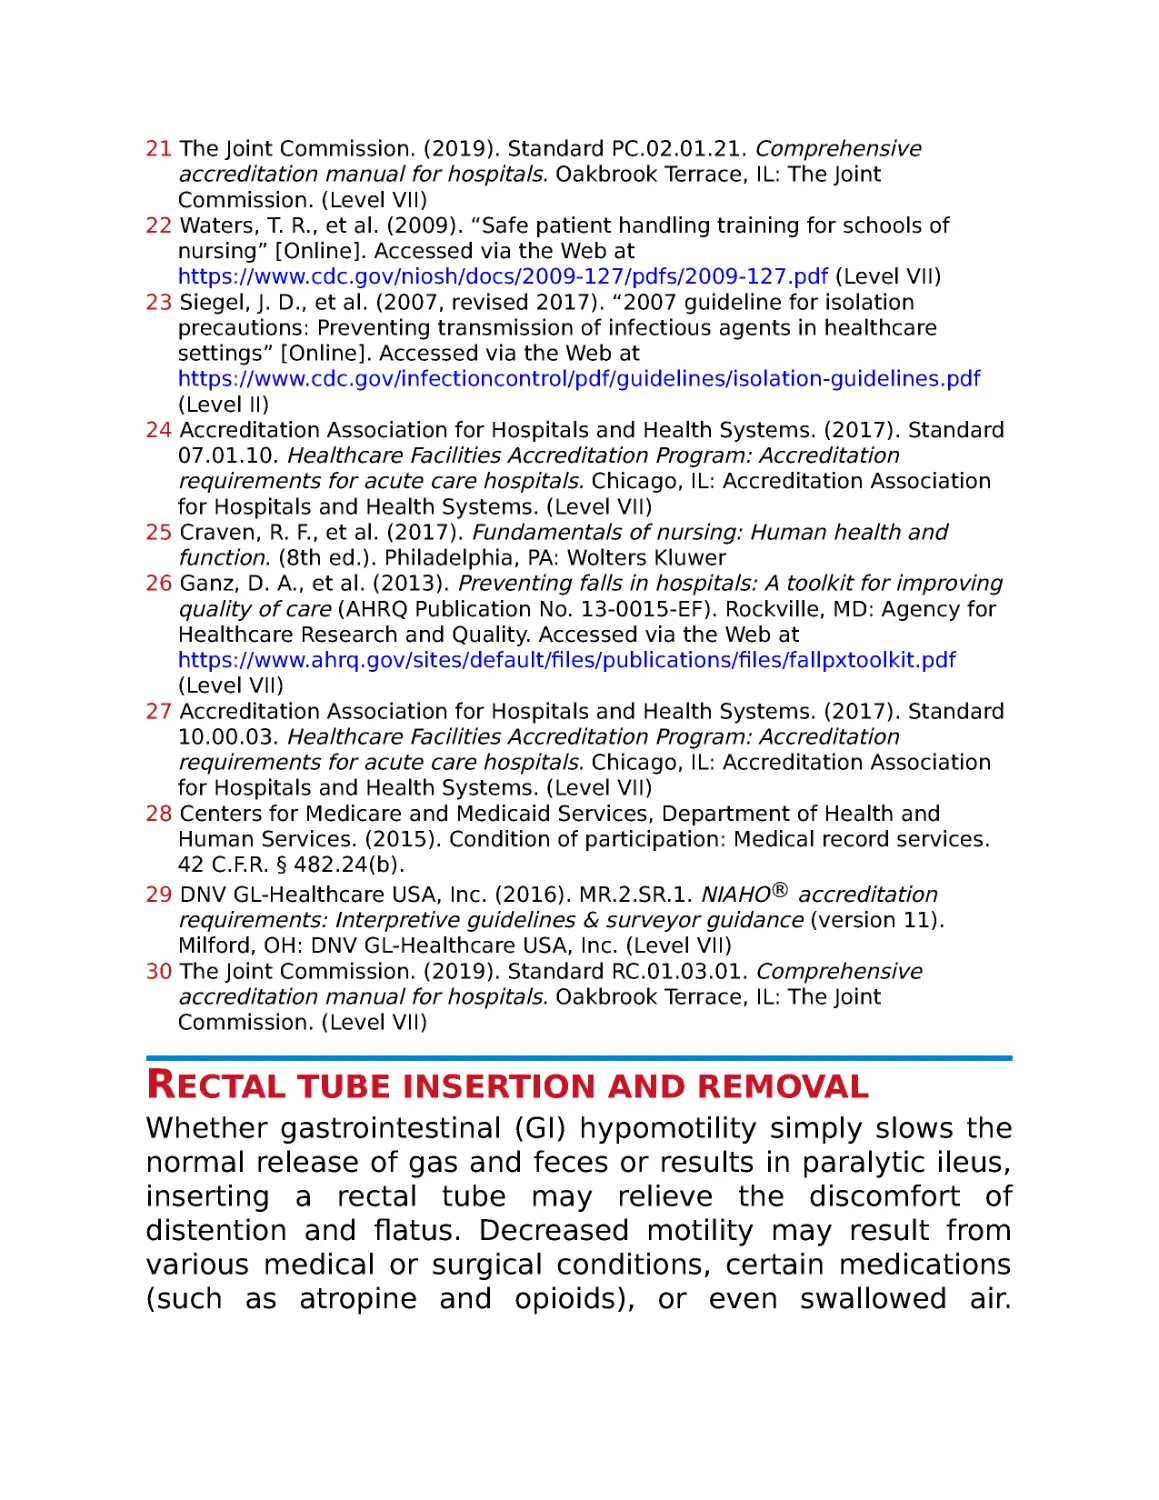 Rectal tube insertion and removal